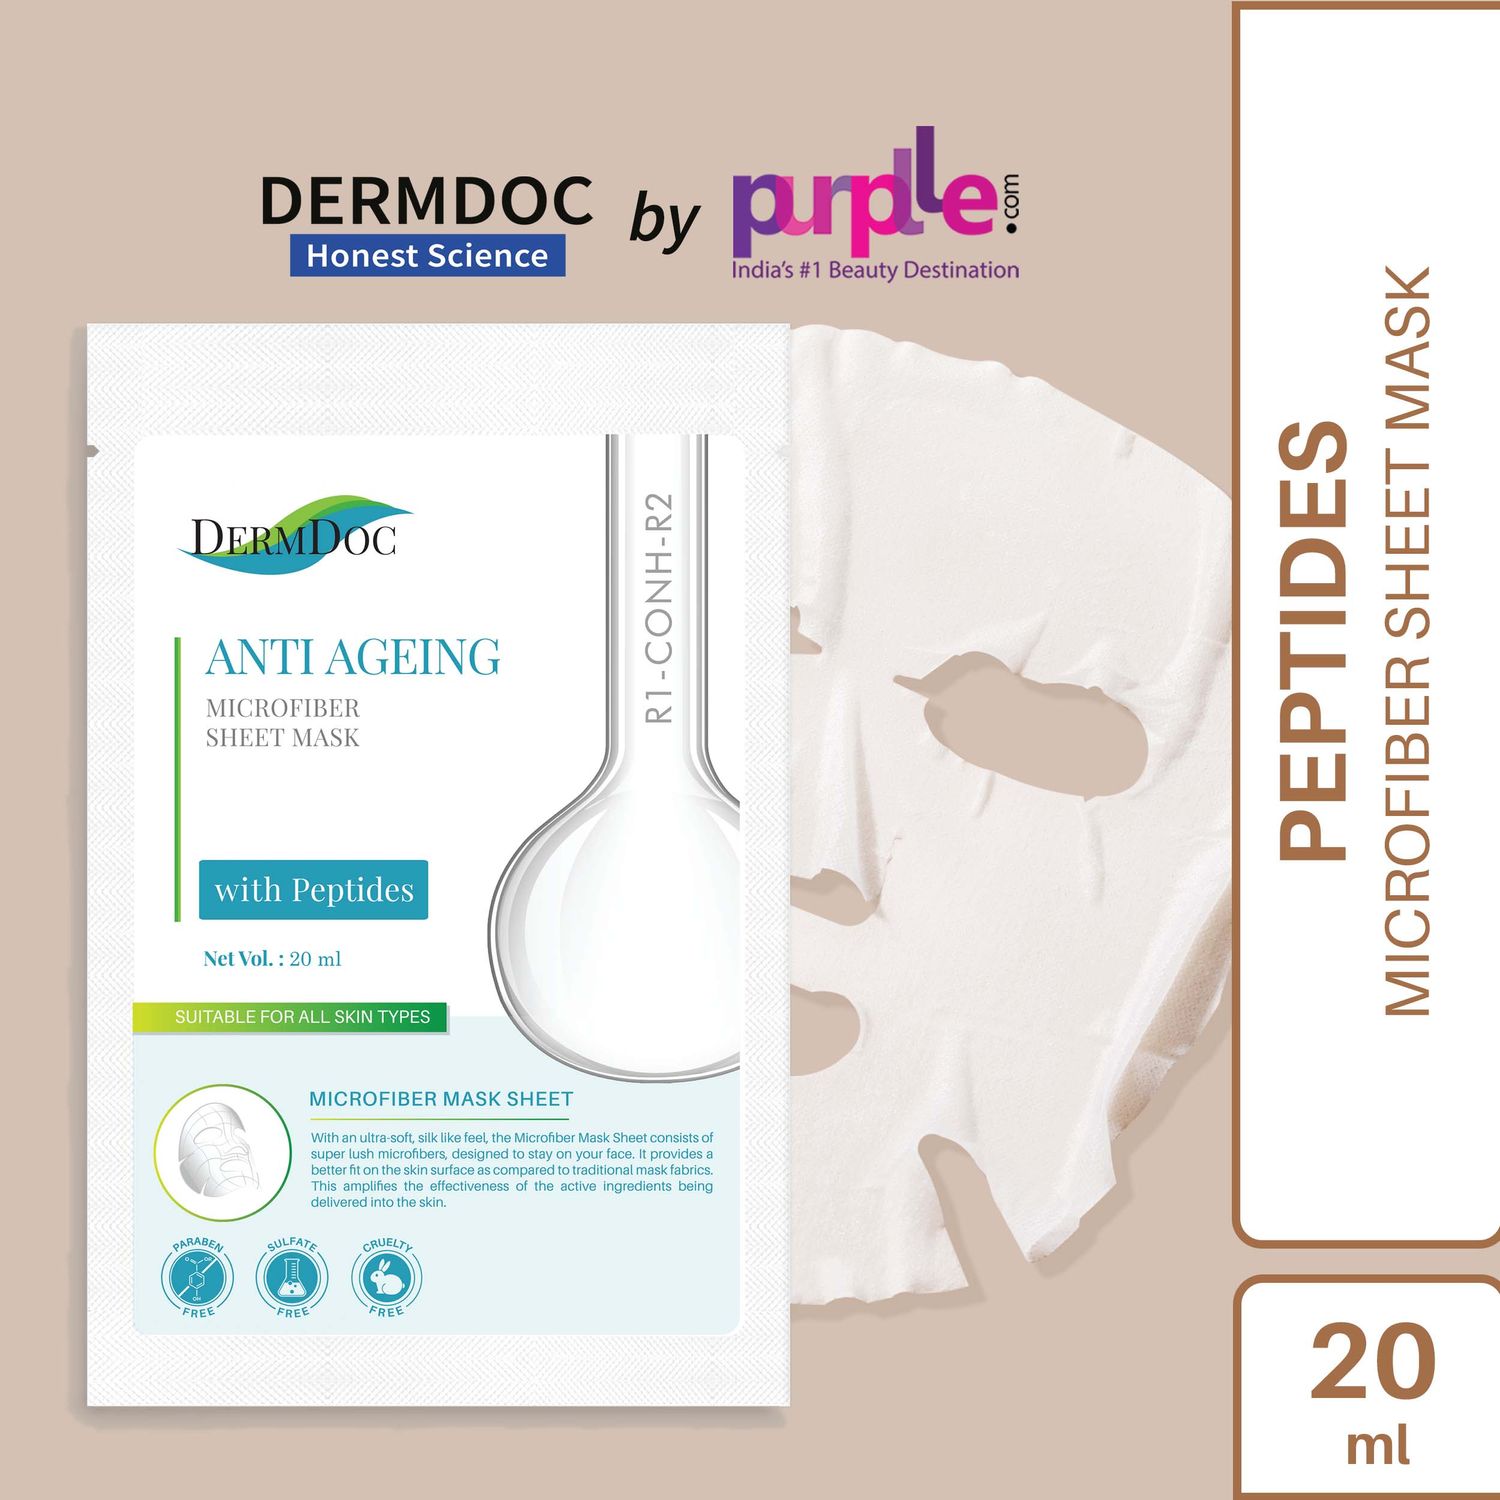 Buy DermDoc by Purplle Peptides Sheet Mask (20ml) | For All Skin Types | Soft & Smooth Skin, Firms Skin, Stimulates Skin, Moisturize | Parabem Free, Sulfate Free, Cruelty Free - Purplle